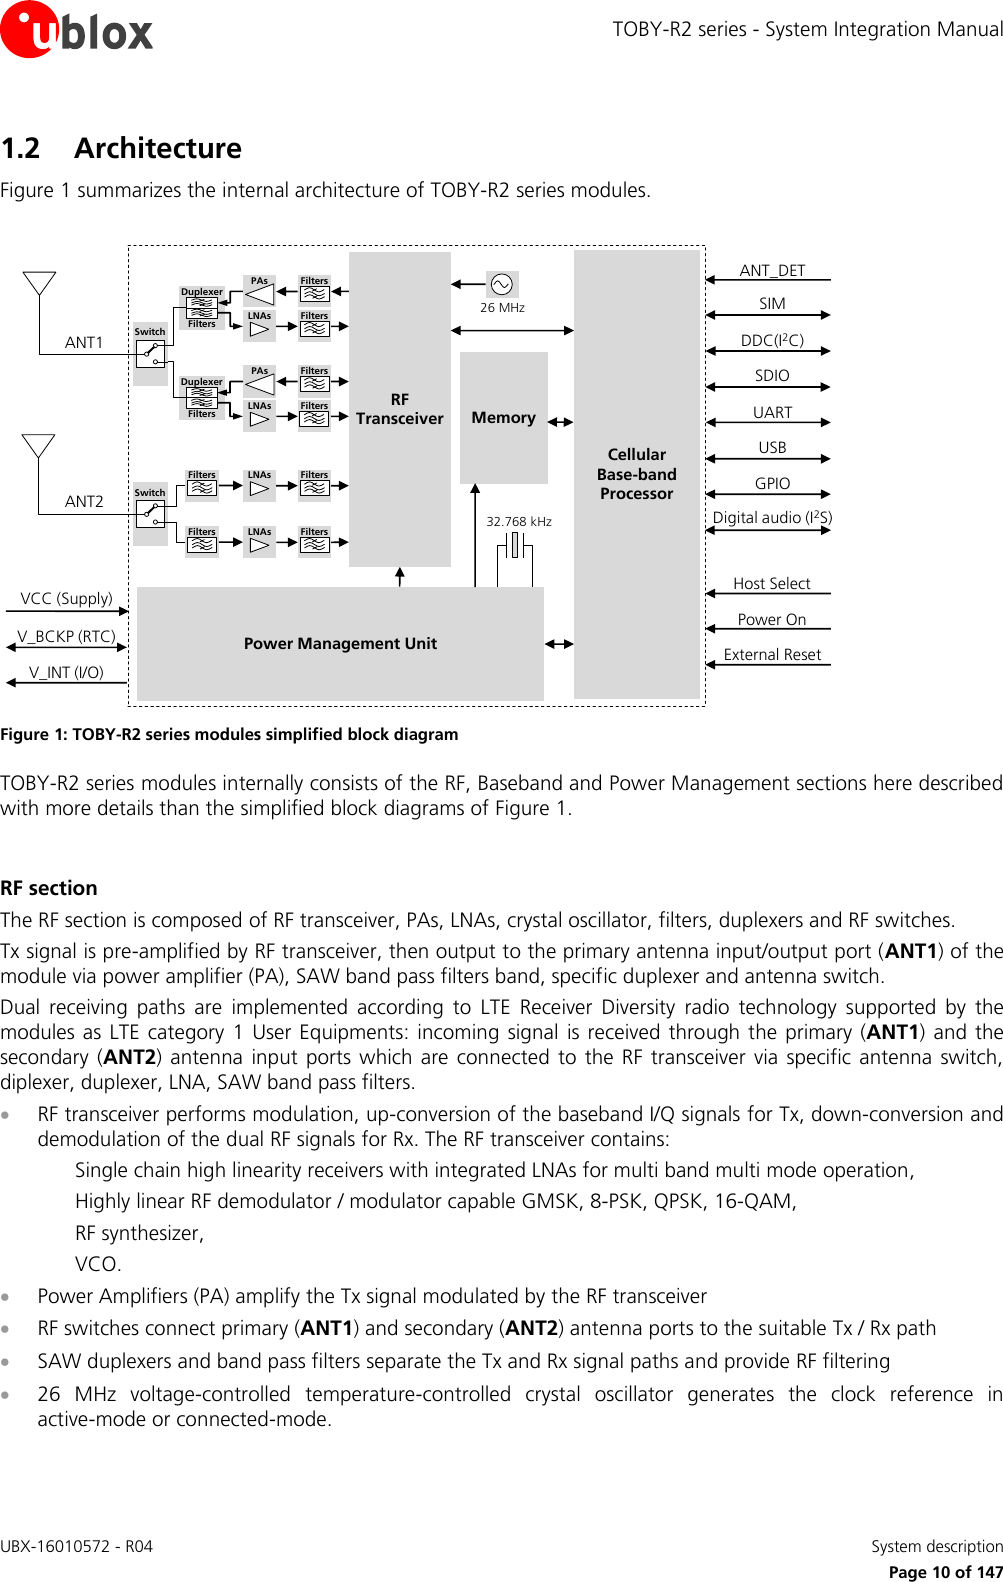 TOBY-R2 series - System Integration Manual UBX-16010572 - R04    System description     Page 10 of 147 1.2 Architecture Figure 1 summarizes the internal architecture of TOBY-R2 series modules.  CellularBase-bandProcessorMemoryPower Management Unit26 MHz32.768 kHzANT1RF TransceiverANT2V_INT (I/O)V_BCKP (RTC)VCC (Supply)SIMUSBGPIOPower OnExternal ResetPAsLNAs FiltersFiltersDuplexerFiltersPAsLNAs FiltersFiltersDuplexerFiltersLNAs FiltersFiltersLNAs FiltersFiltersSwitchSwitchDDC(I2C)SDIOUARTDigital audio (I2S)ANT_DETHost Select Figure 1: TOBY-R2 series modules simplified block diagram TOBY-R2 series modules internally consists of the RF, Baseband and Power Management sections here described with more details than the simplified block diagrams of Figure 1.  RF section The RF section is composed of RF transceiver, PAs, LNAs, crystal oscillator, filters, duplexers and RF switches. Tx signal is pre-amplified by RF transceiver, then output to the primary antenna input/output port (ANT1) of the module via power amplifier (PA), SAW band pass filters band, specific duplexer and antenna switch. Dual  receiving  paths  are  implemented  according  to  LTE  Receiver  Diversity  radio  technology  supported  by  the modules as LTE  category  1 User Equipments: incoming signal is received  through the  primary  (ANT1) and the secondary  (ANT2)  antenna  input ports which are  connected  to the  RF  transceiver via  specific antenna  switch, diplexer, duplexer, LNA, SAW band pass filters.   RF transceiver performs modulation, up-conversion of the baseband I/Q signals for Tx, down-conversion and demodulation of the dual RF signals for Rx. The RF transceiver contains: Single chain high linearity receivers with integrated LNAs for multi band multi mode operation, Highly linear RF demodulator / modulator capable GMSK, 8-PSK, QPSK, 16-QAM,  RF synthesizer, VCO.  Power Amplifiers (PA) amplify the Tx signal modulated by the RF transceiver   RF switches connect primary (ANT1) and secondary (ANT2) antenna ports to the suitable Tx / Rx path  SAW duplexers and band pass filters separate the Tx and Rx signal paths and provide RF filtering  26  MHz  voltage-controlled  temperature-controlled  crystal  oscillator  generates  the  clock  reference  in active-mode or connected-mode.  